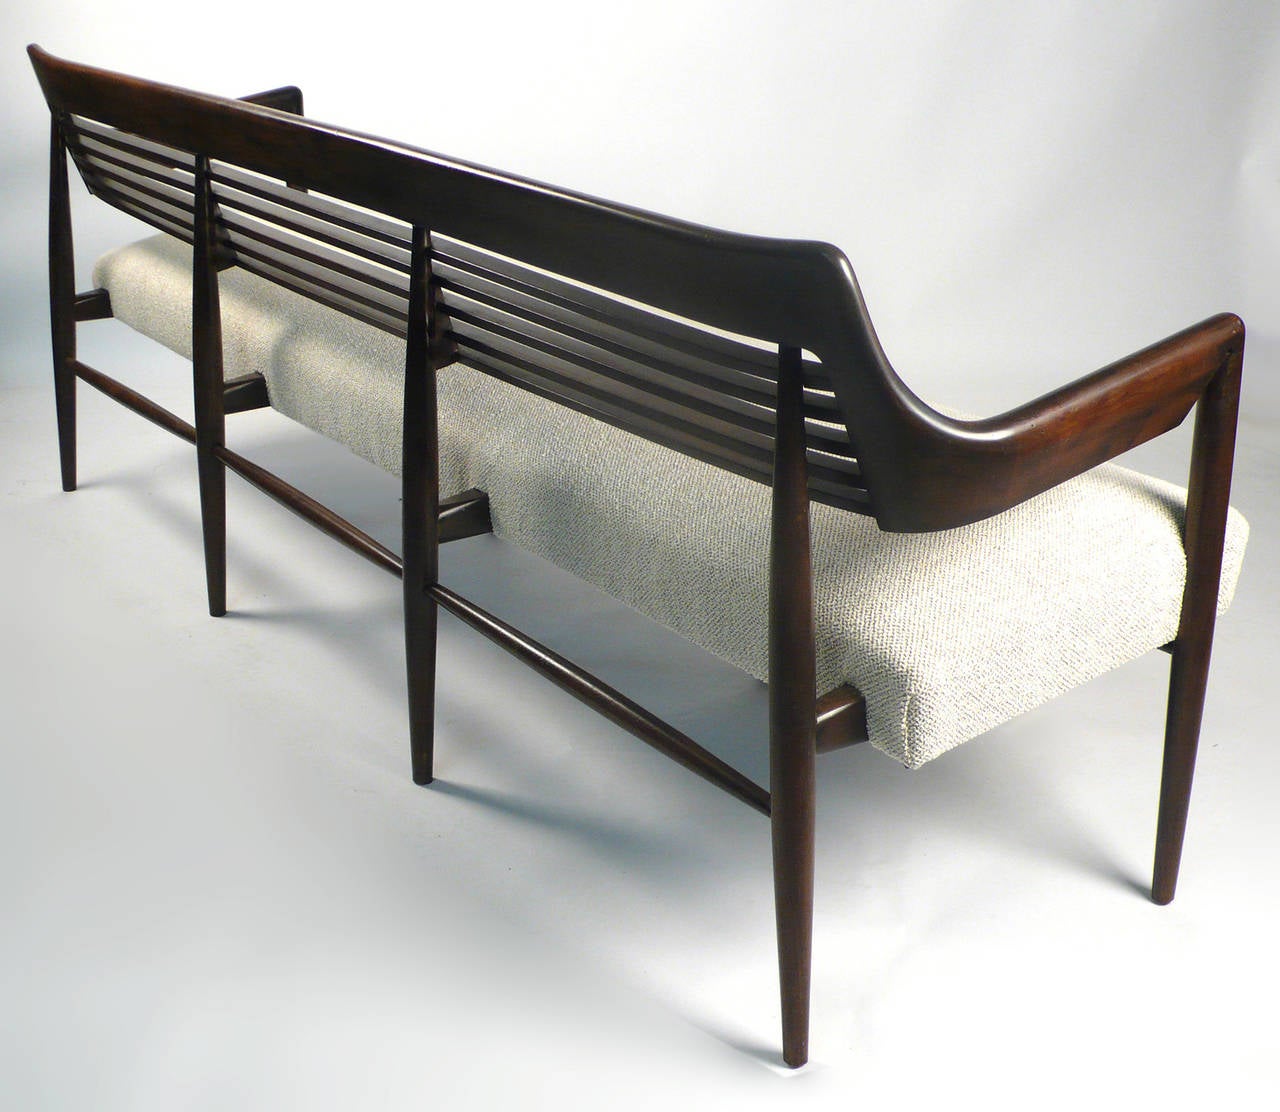 Carved Architectural Slatted Dassi Bench